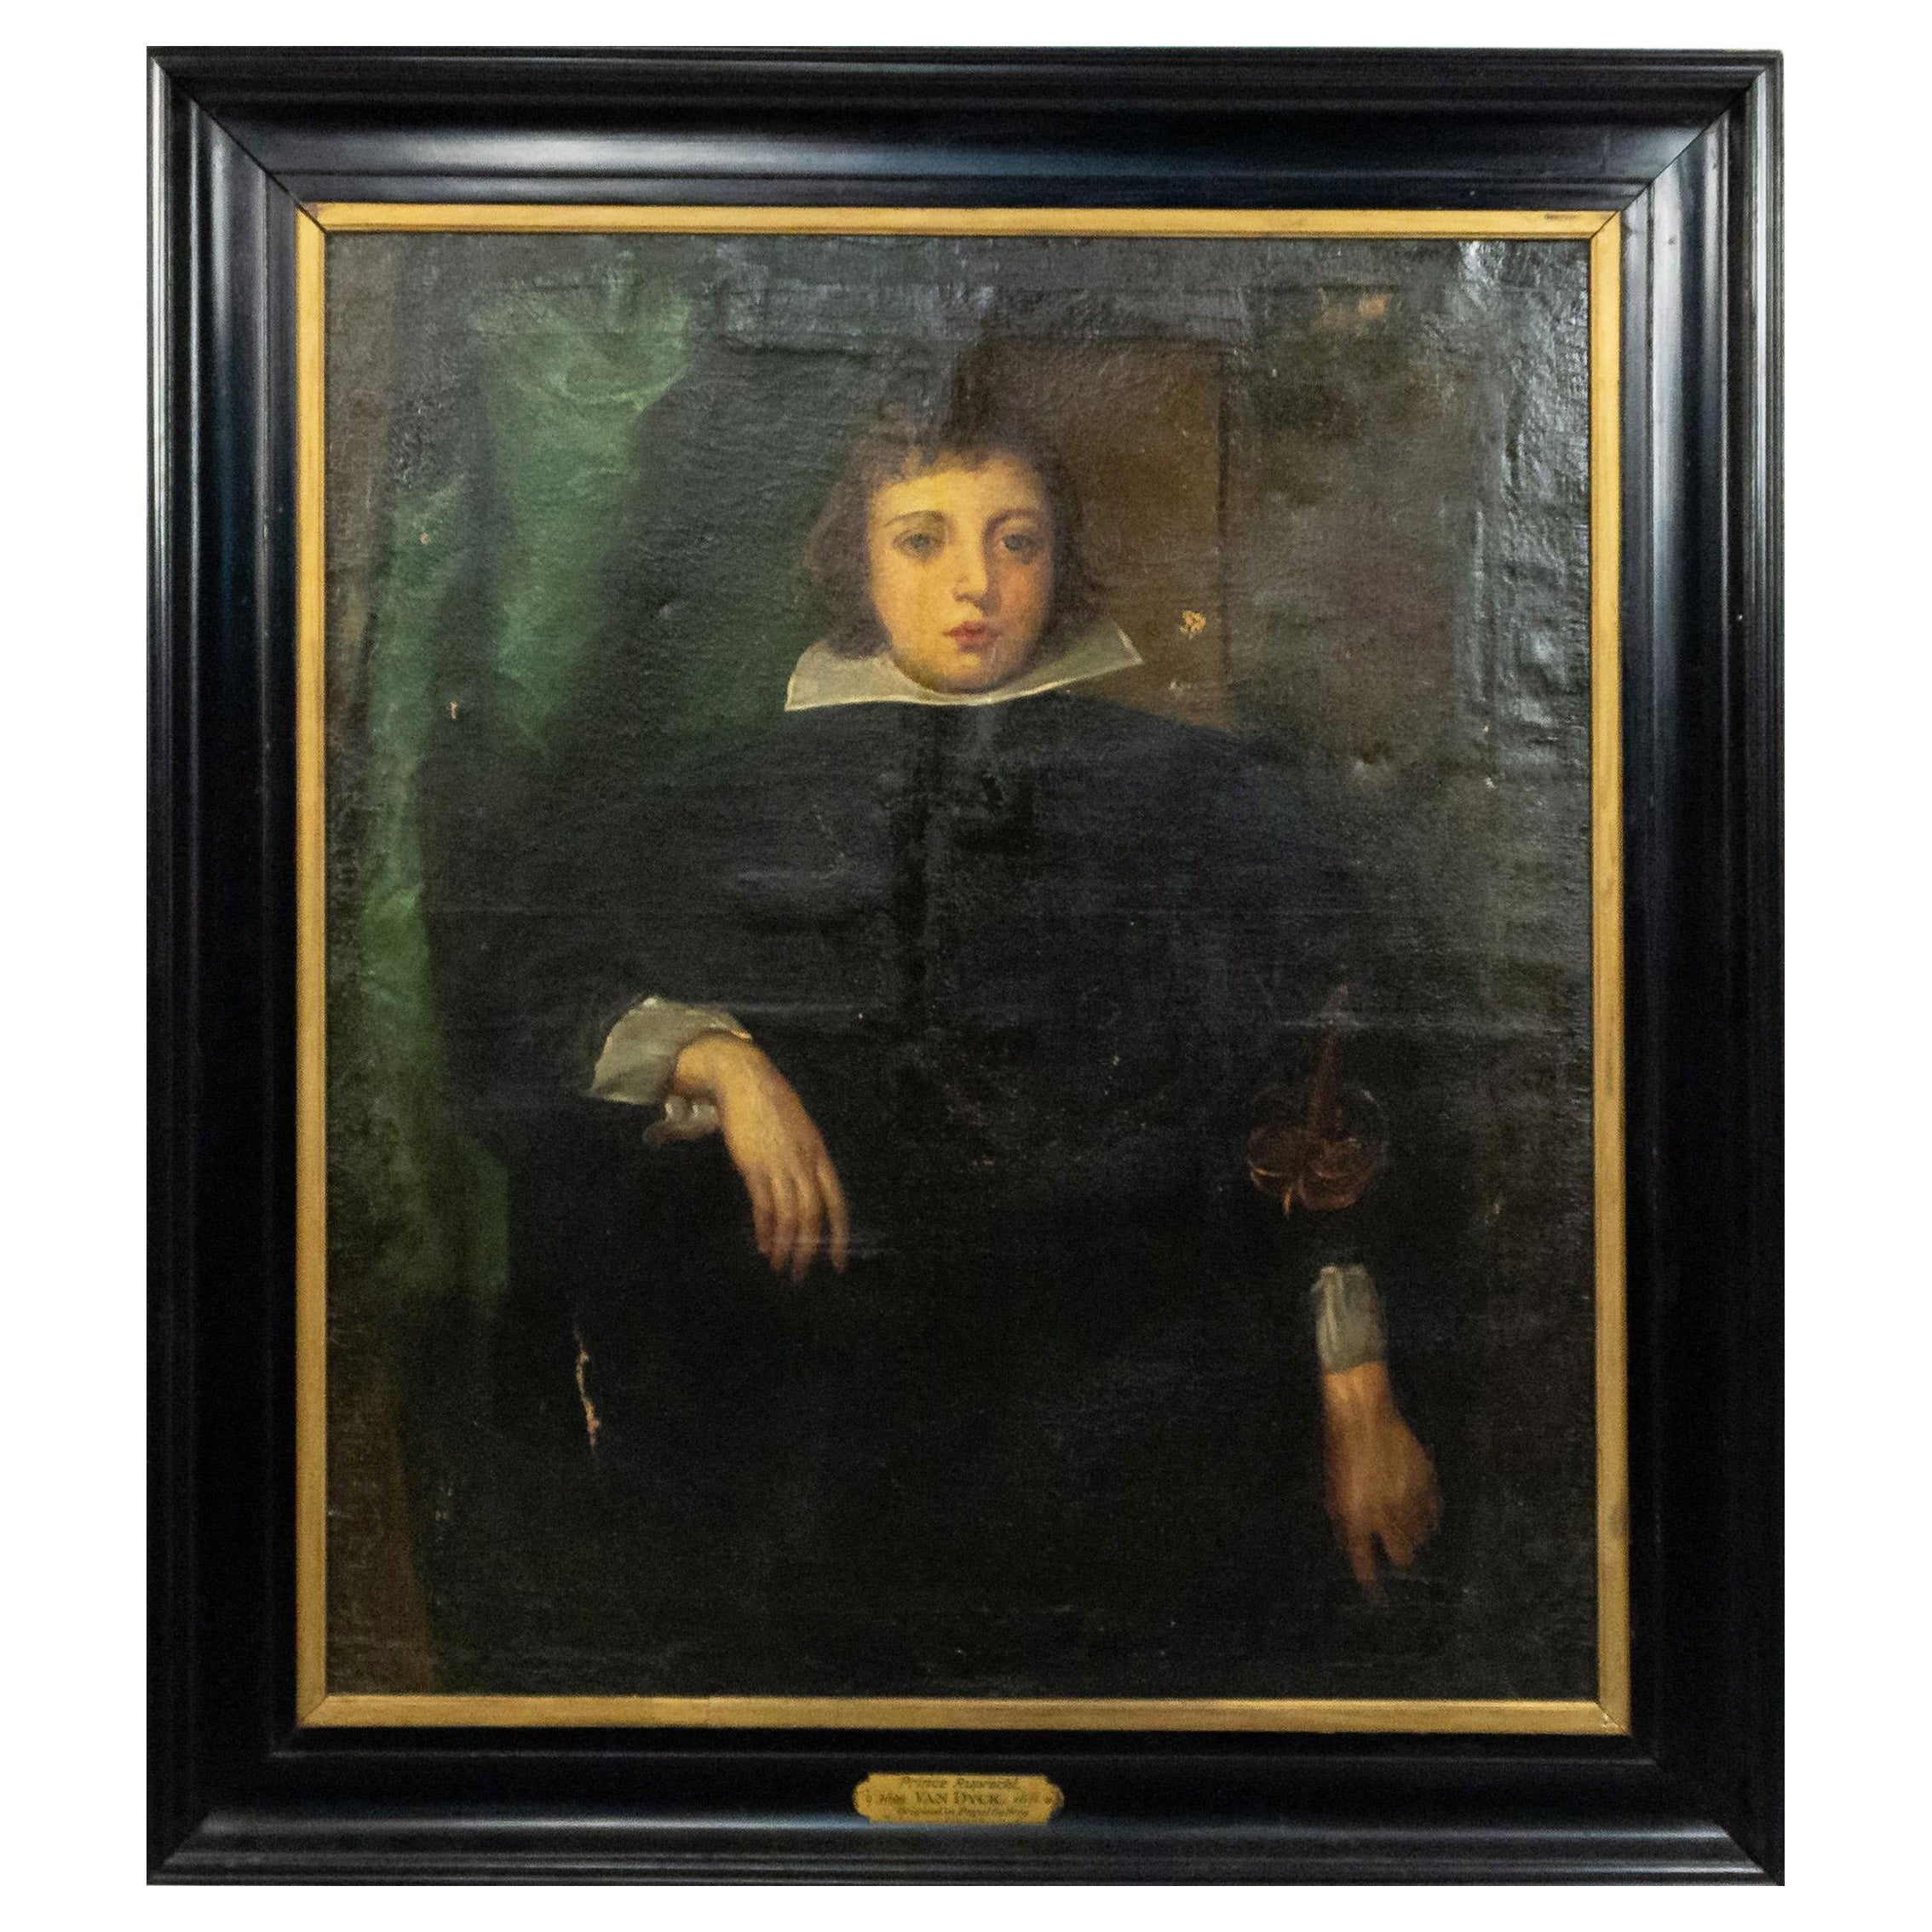 19th Century Dutch Style Framed Oil Portrait Painting in the Style of Van Dyke